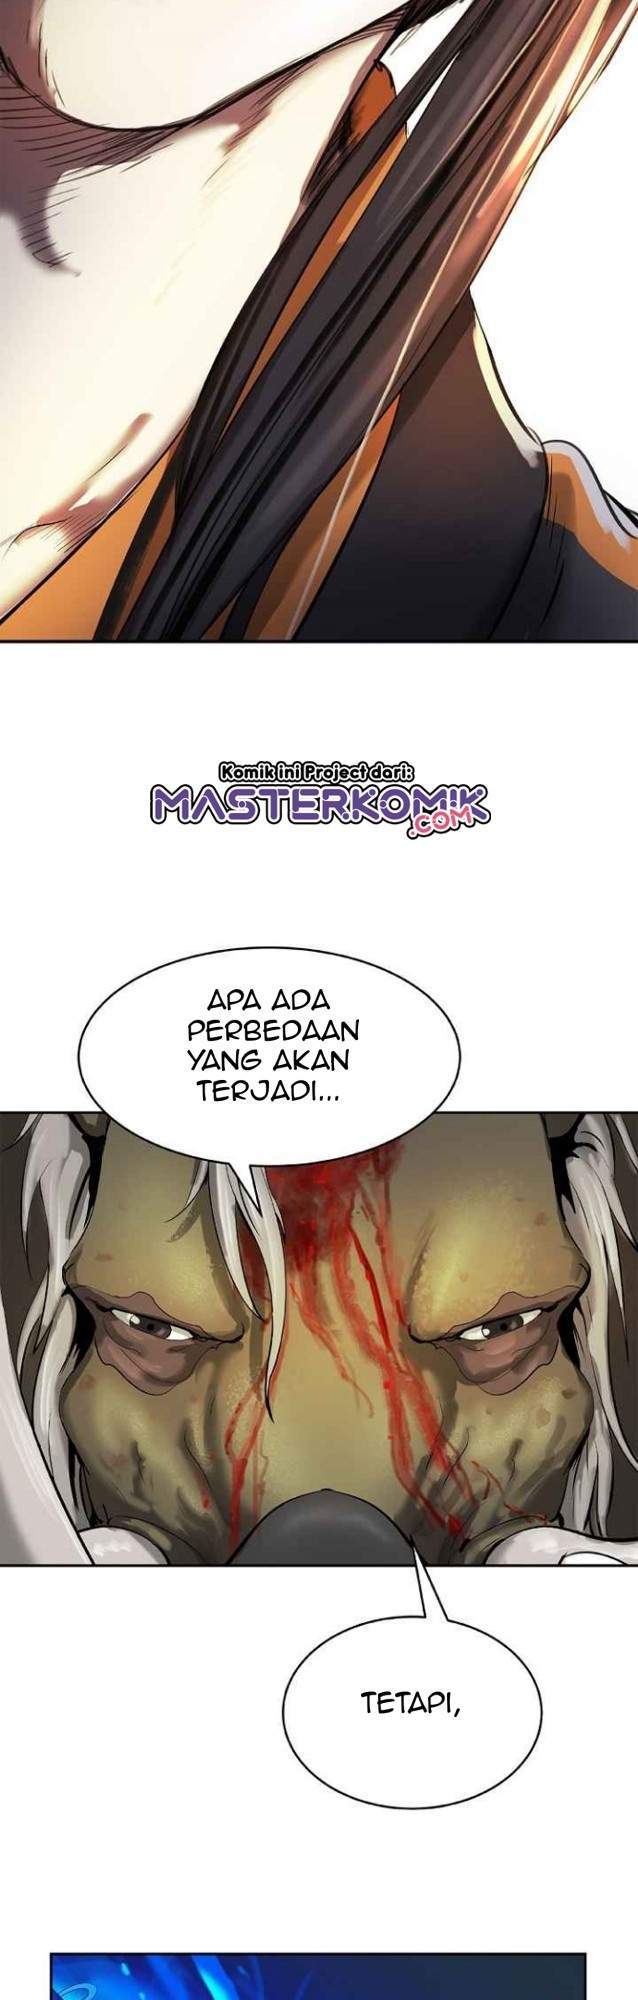 Cystic Story Chapter 18 44